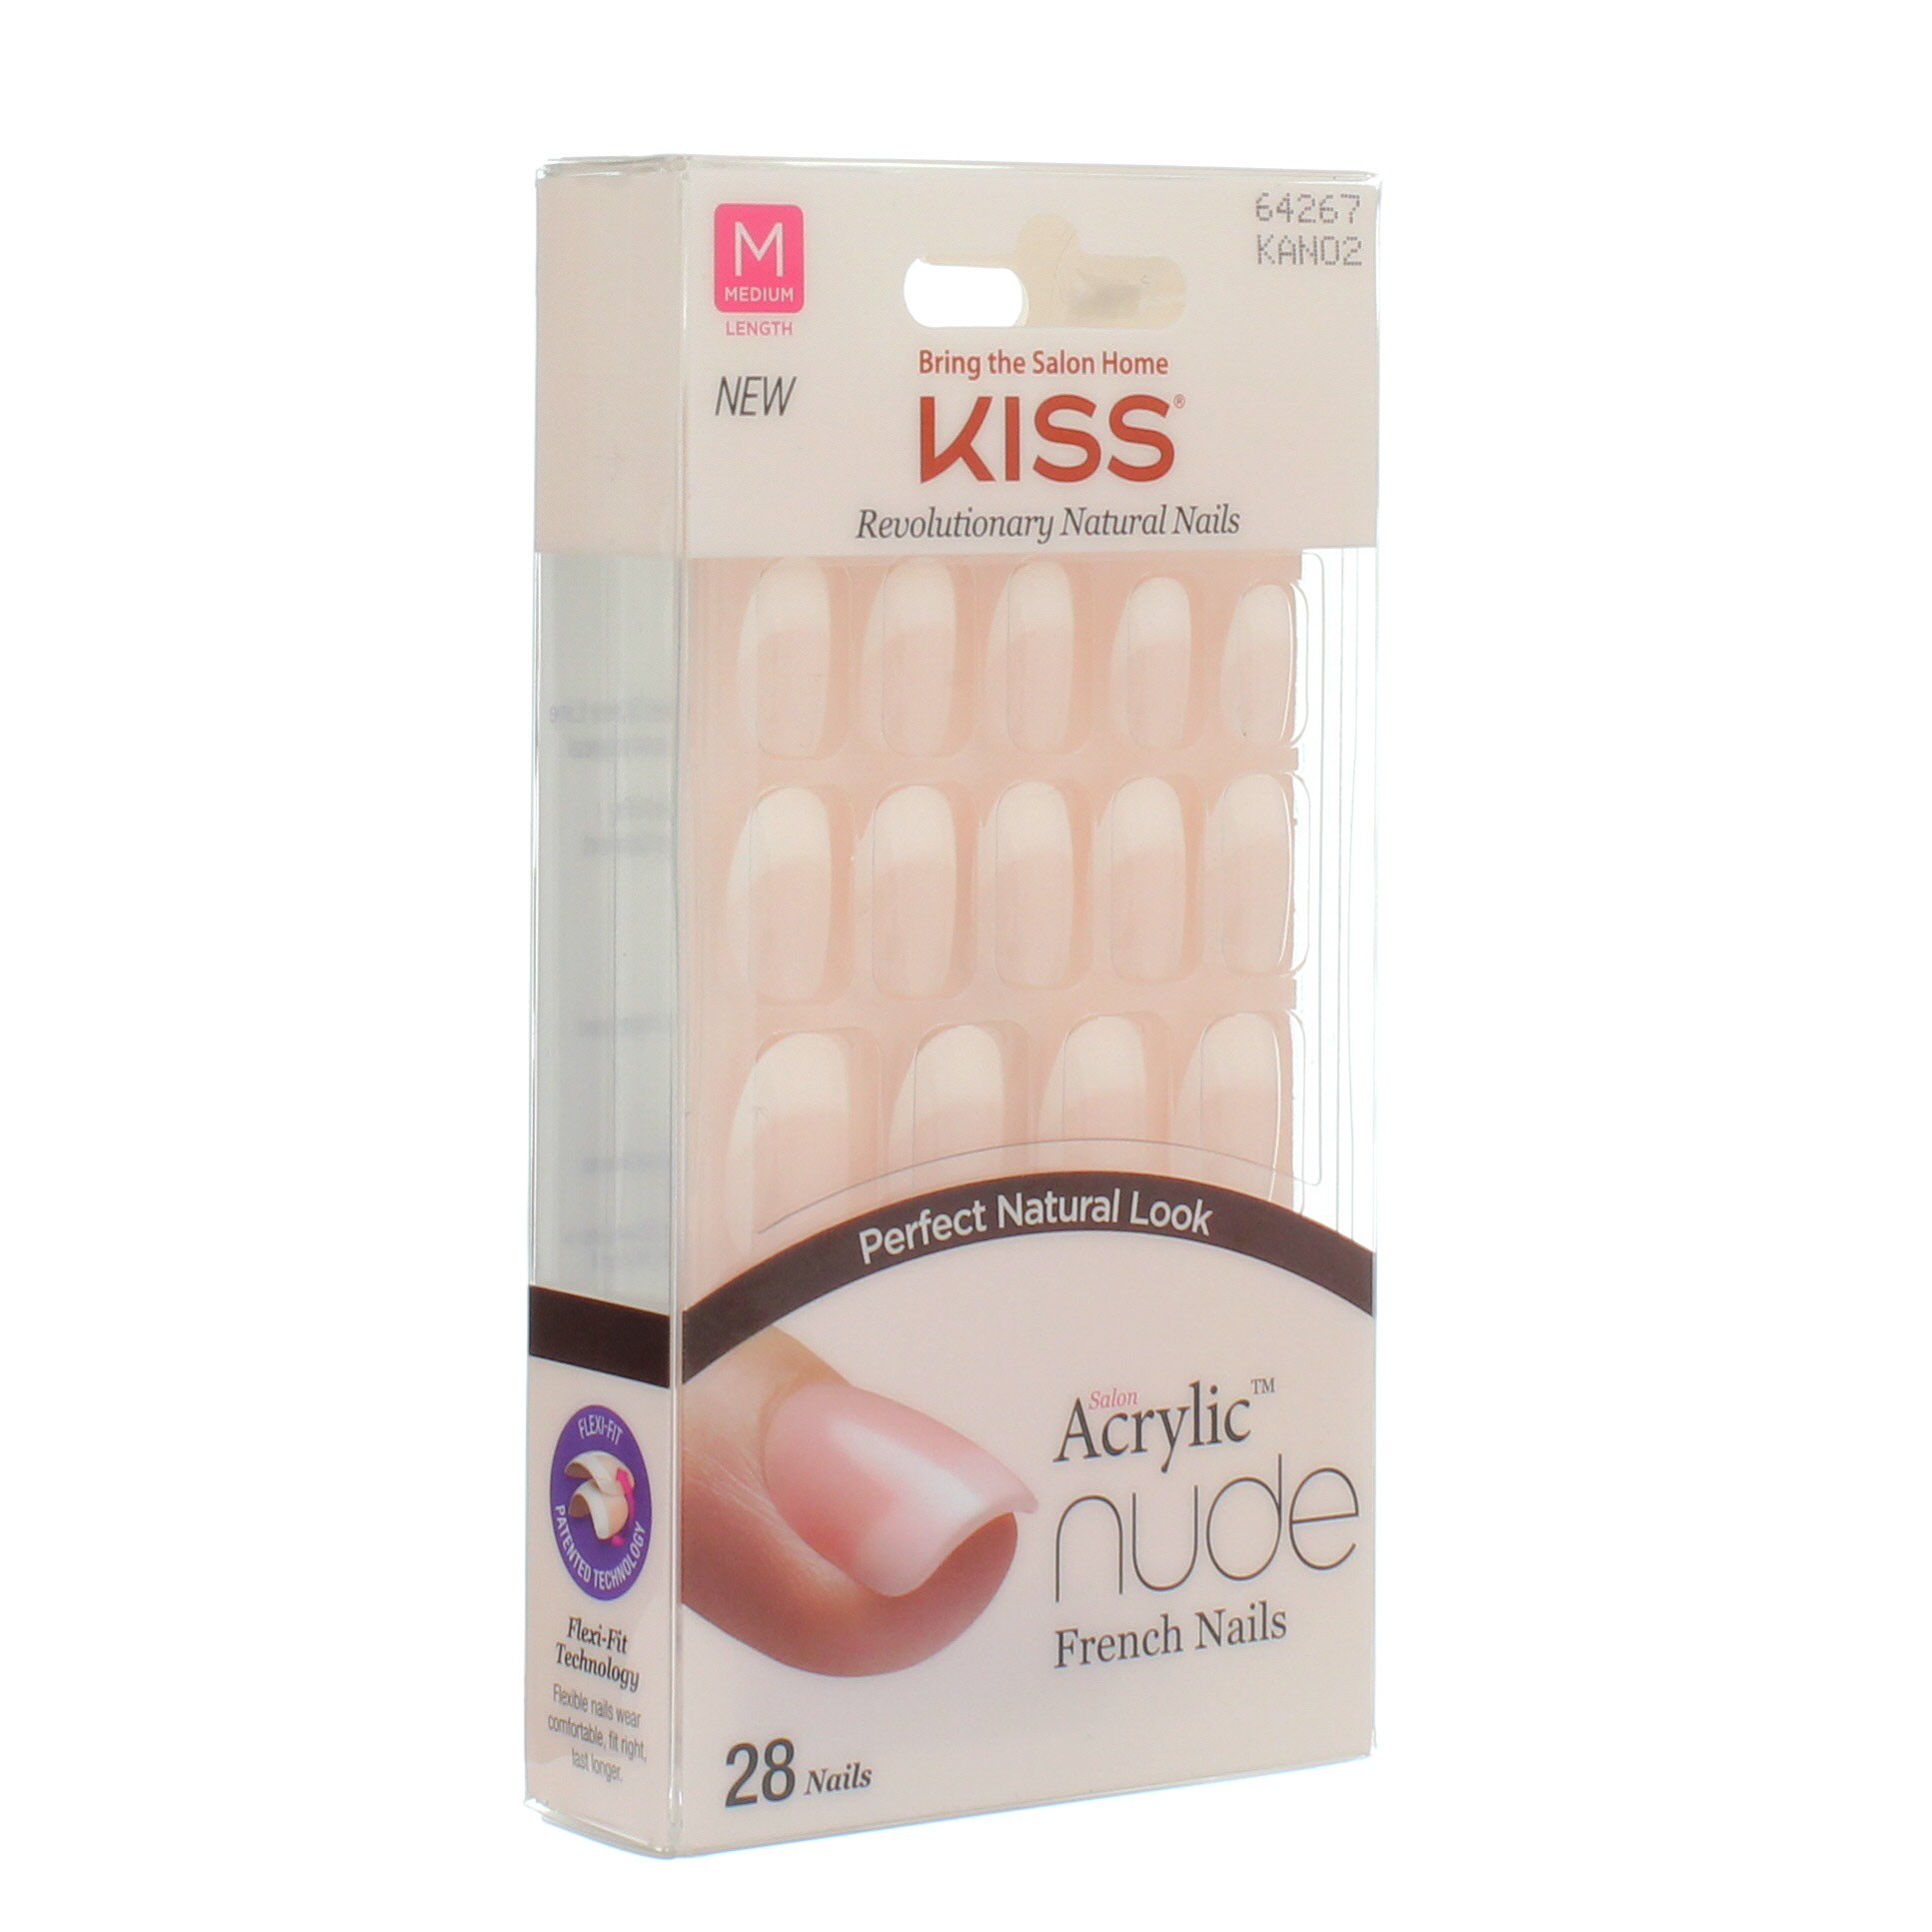 Kiss Salon Acrylic Nude French Nails 28 Count 